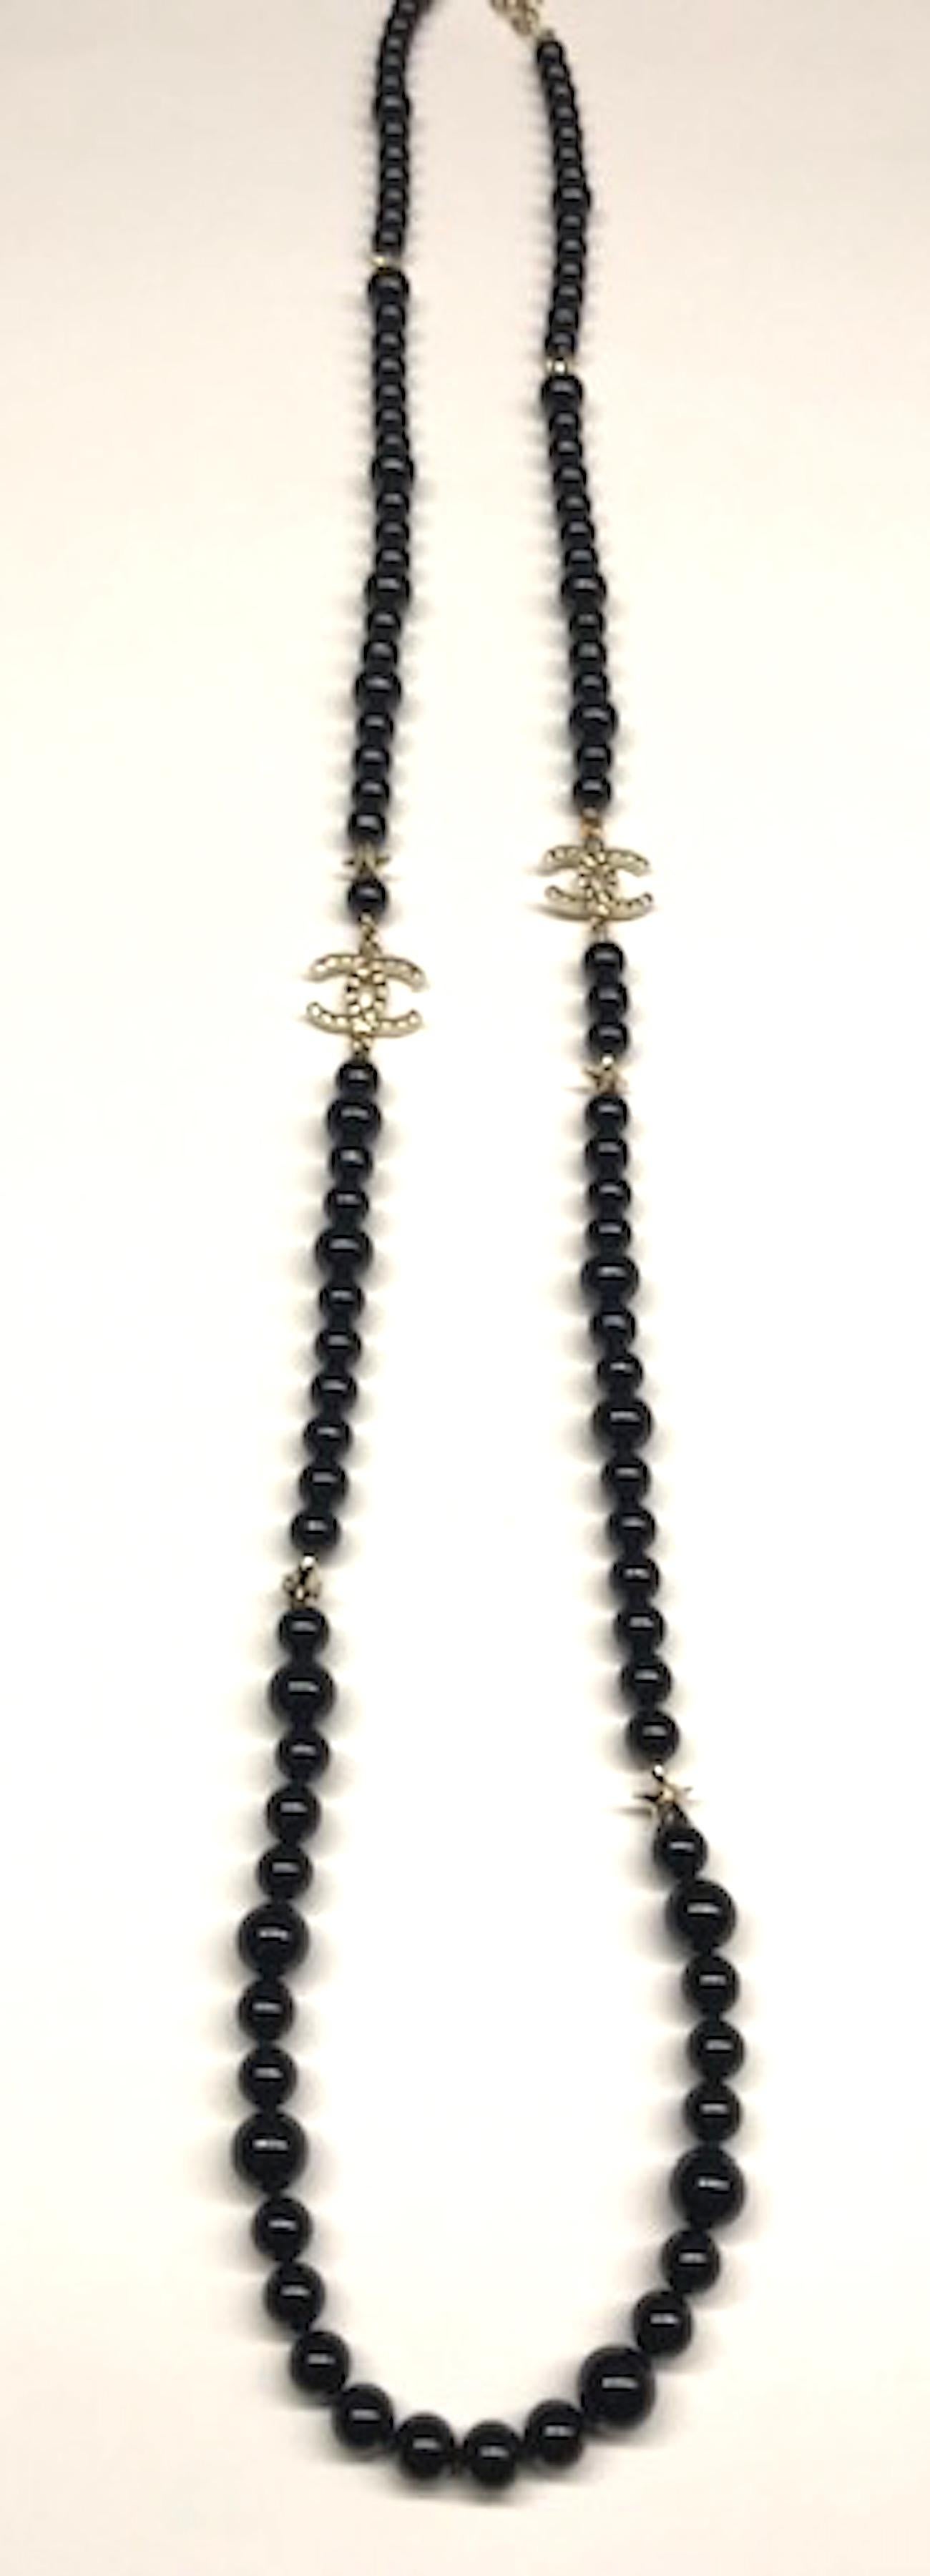 Chanel Long Black Glass Bead & Star Necklace, 2017 Cruise Collection 8